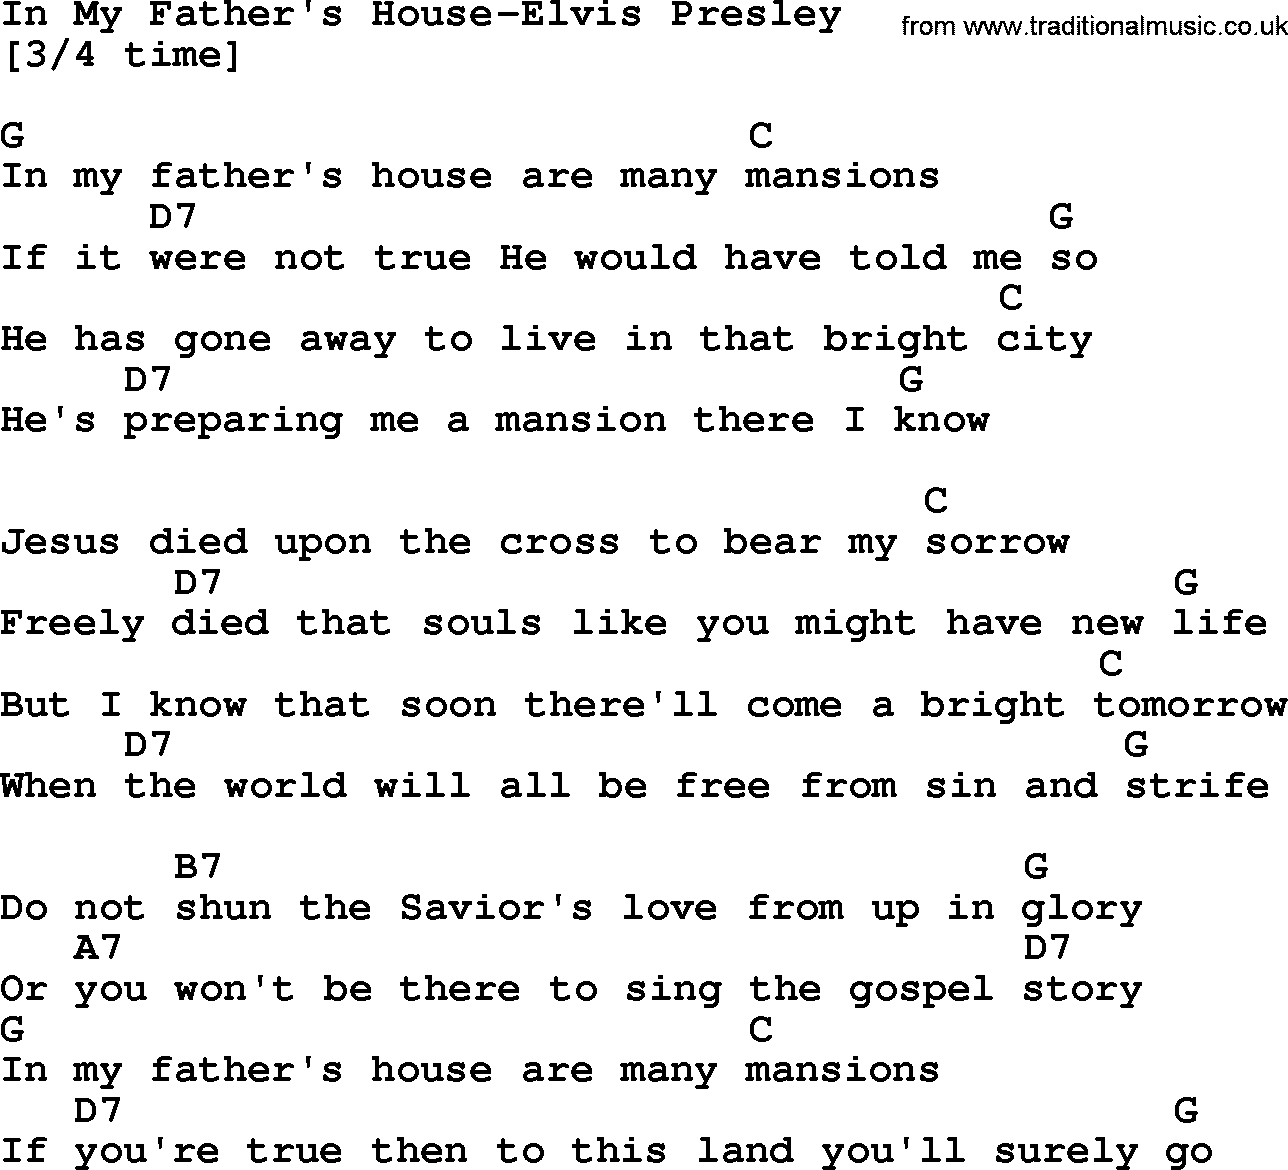 Country music song: In My Father's House-Elvis Presley lyrics and chords